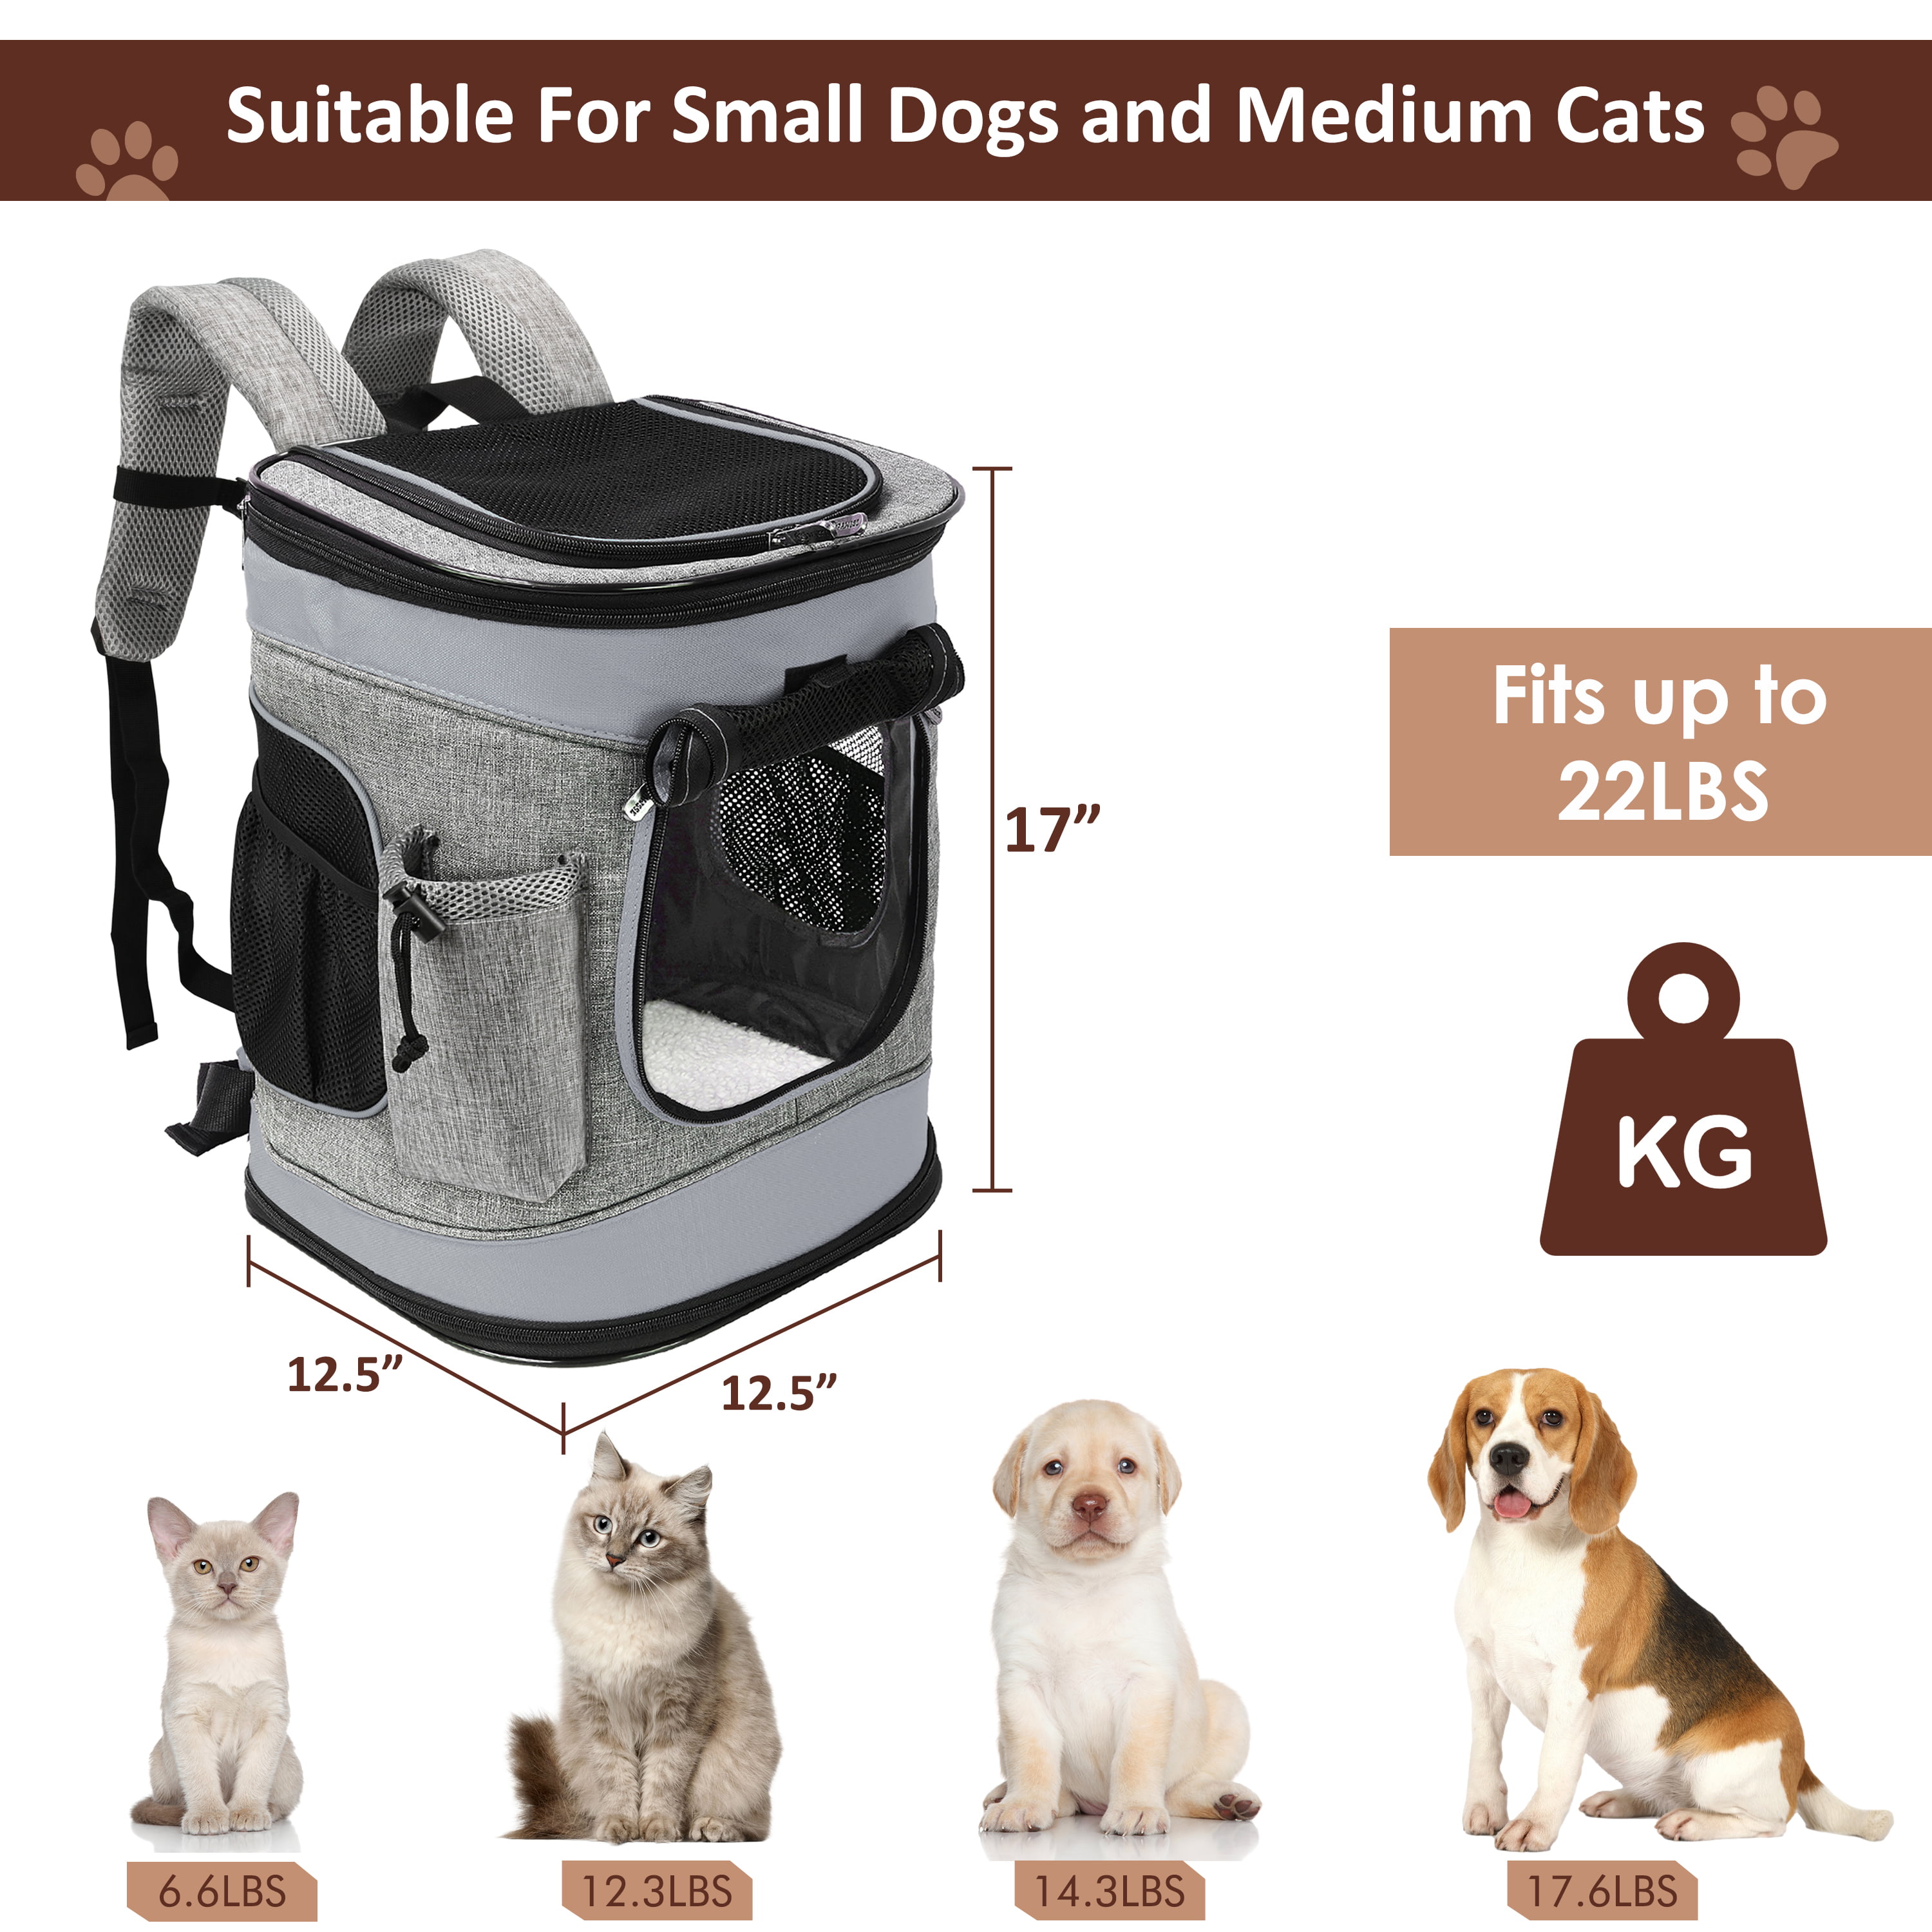 Cat Backpack Carrier, Expandable Small Pet Carriers Backpack for Cats and  Puppies up to 20 Lbs, Cat Back Pack for Travel, Hiking -  Denmark